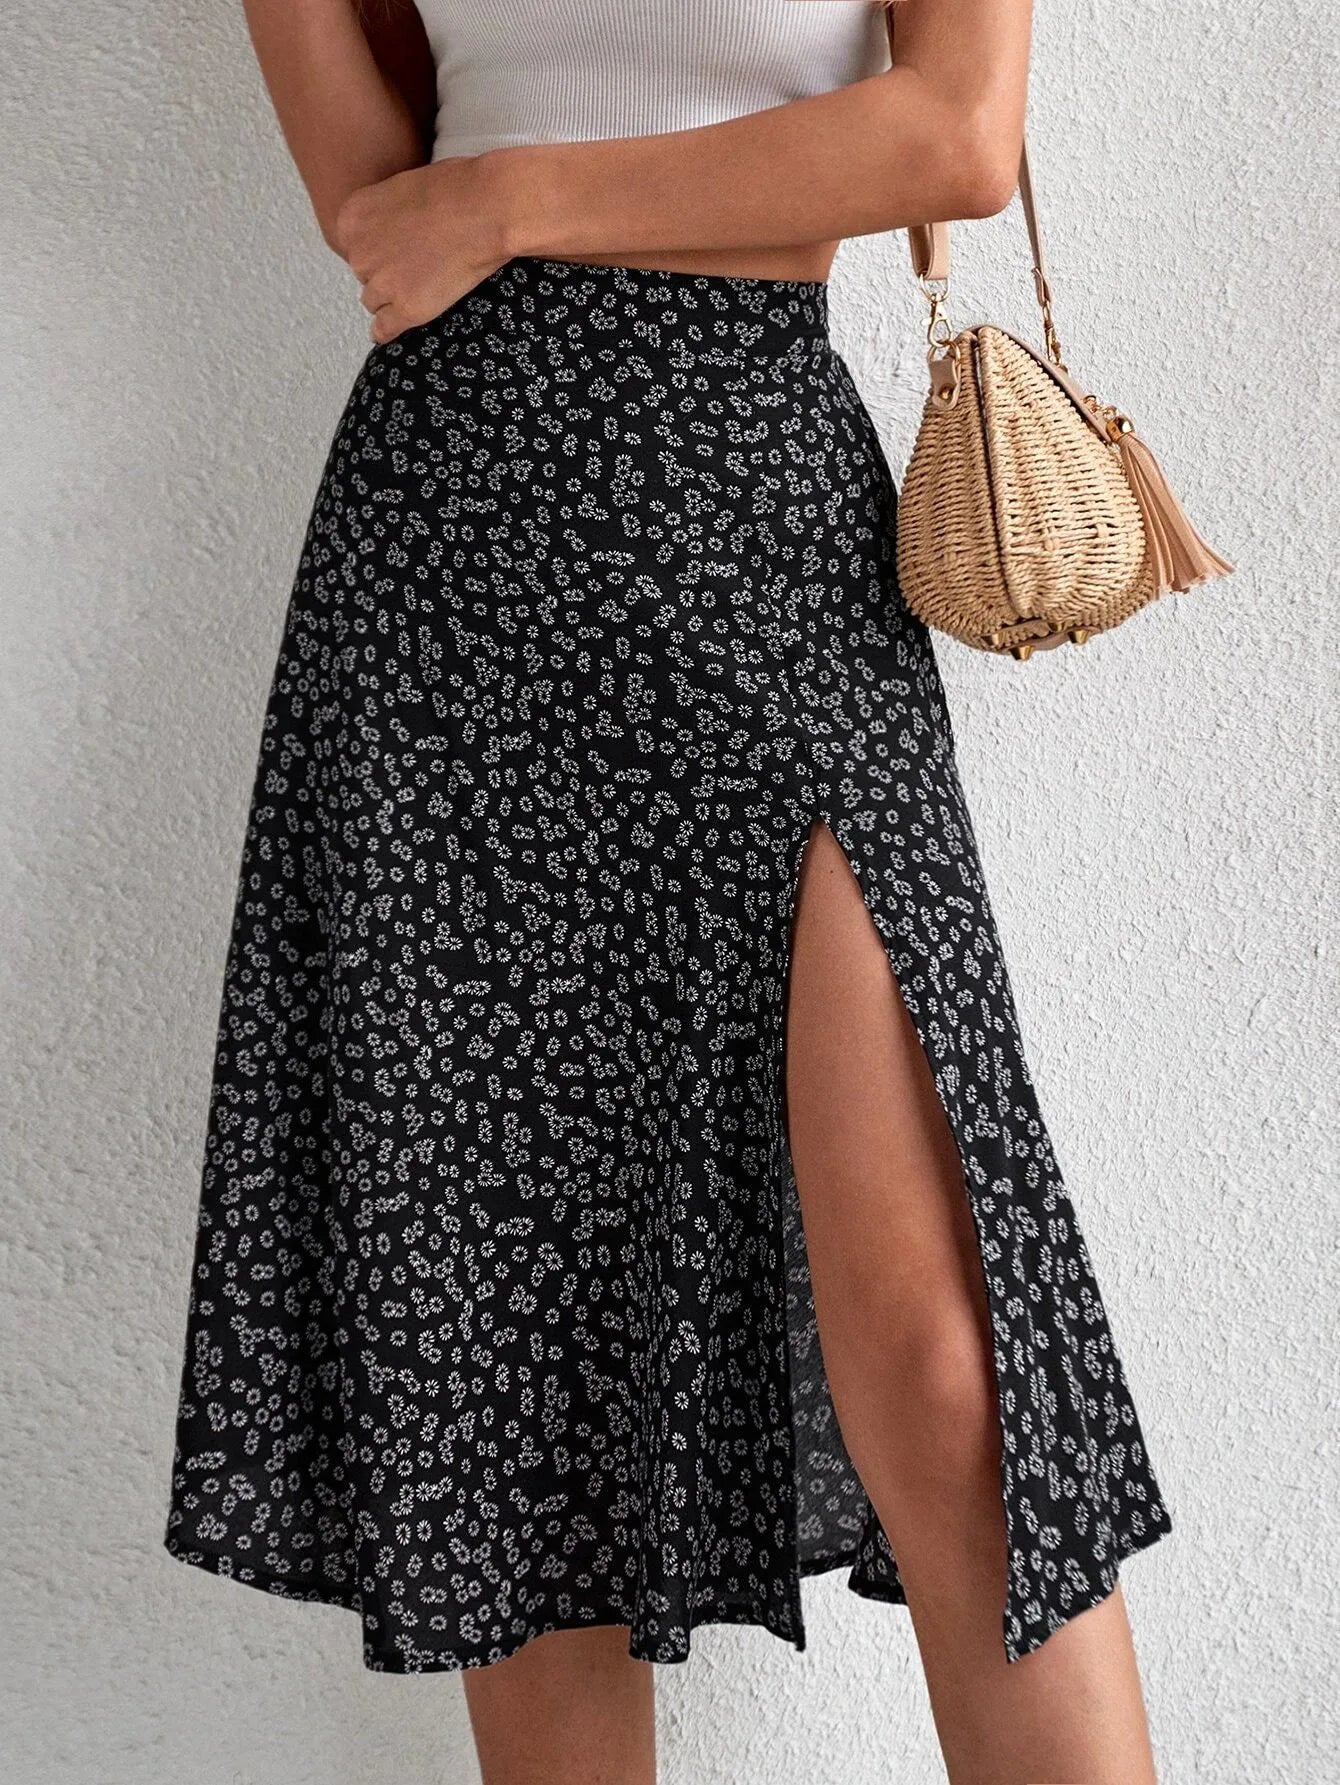 New Women Summer Wrapped Skirts Beach Holiday Clothes High Waist Floral Print Split Casual Summer Midi Skirt Female Sexy voguable